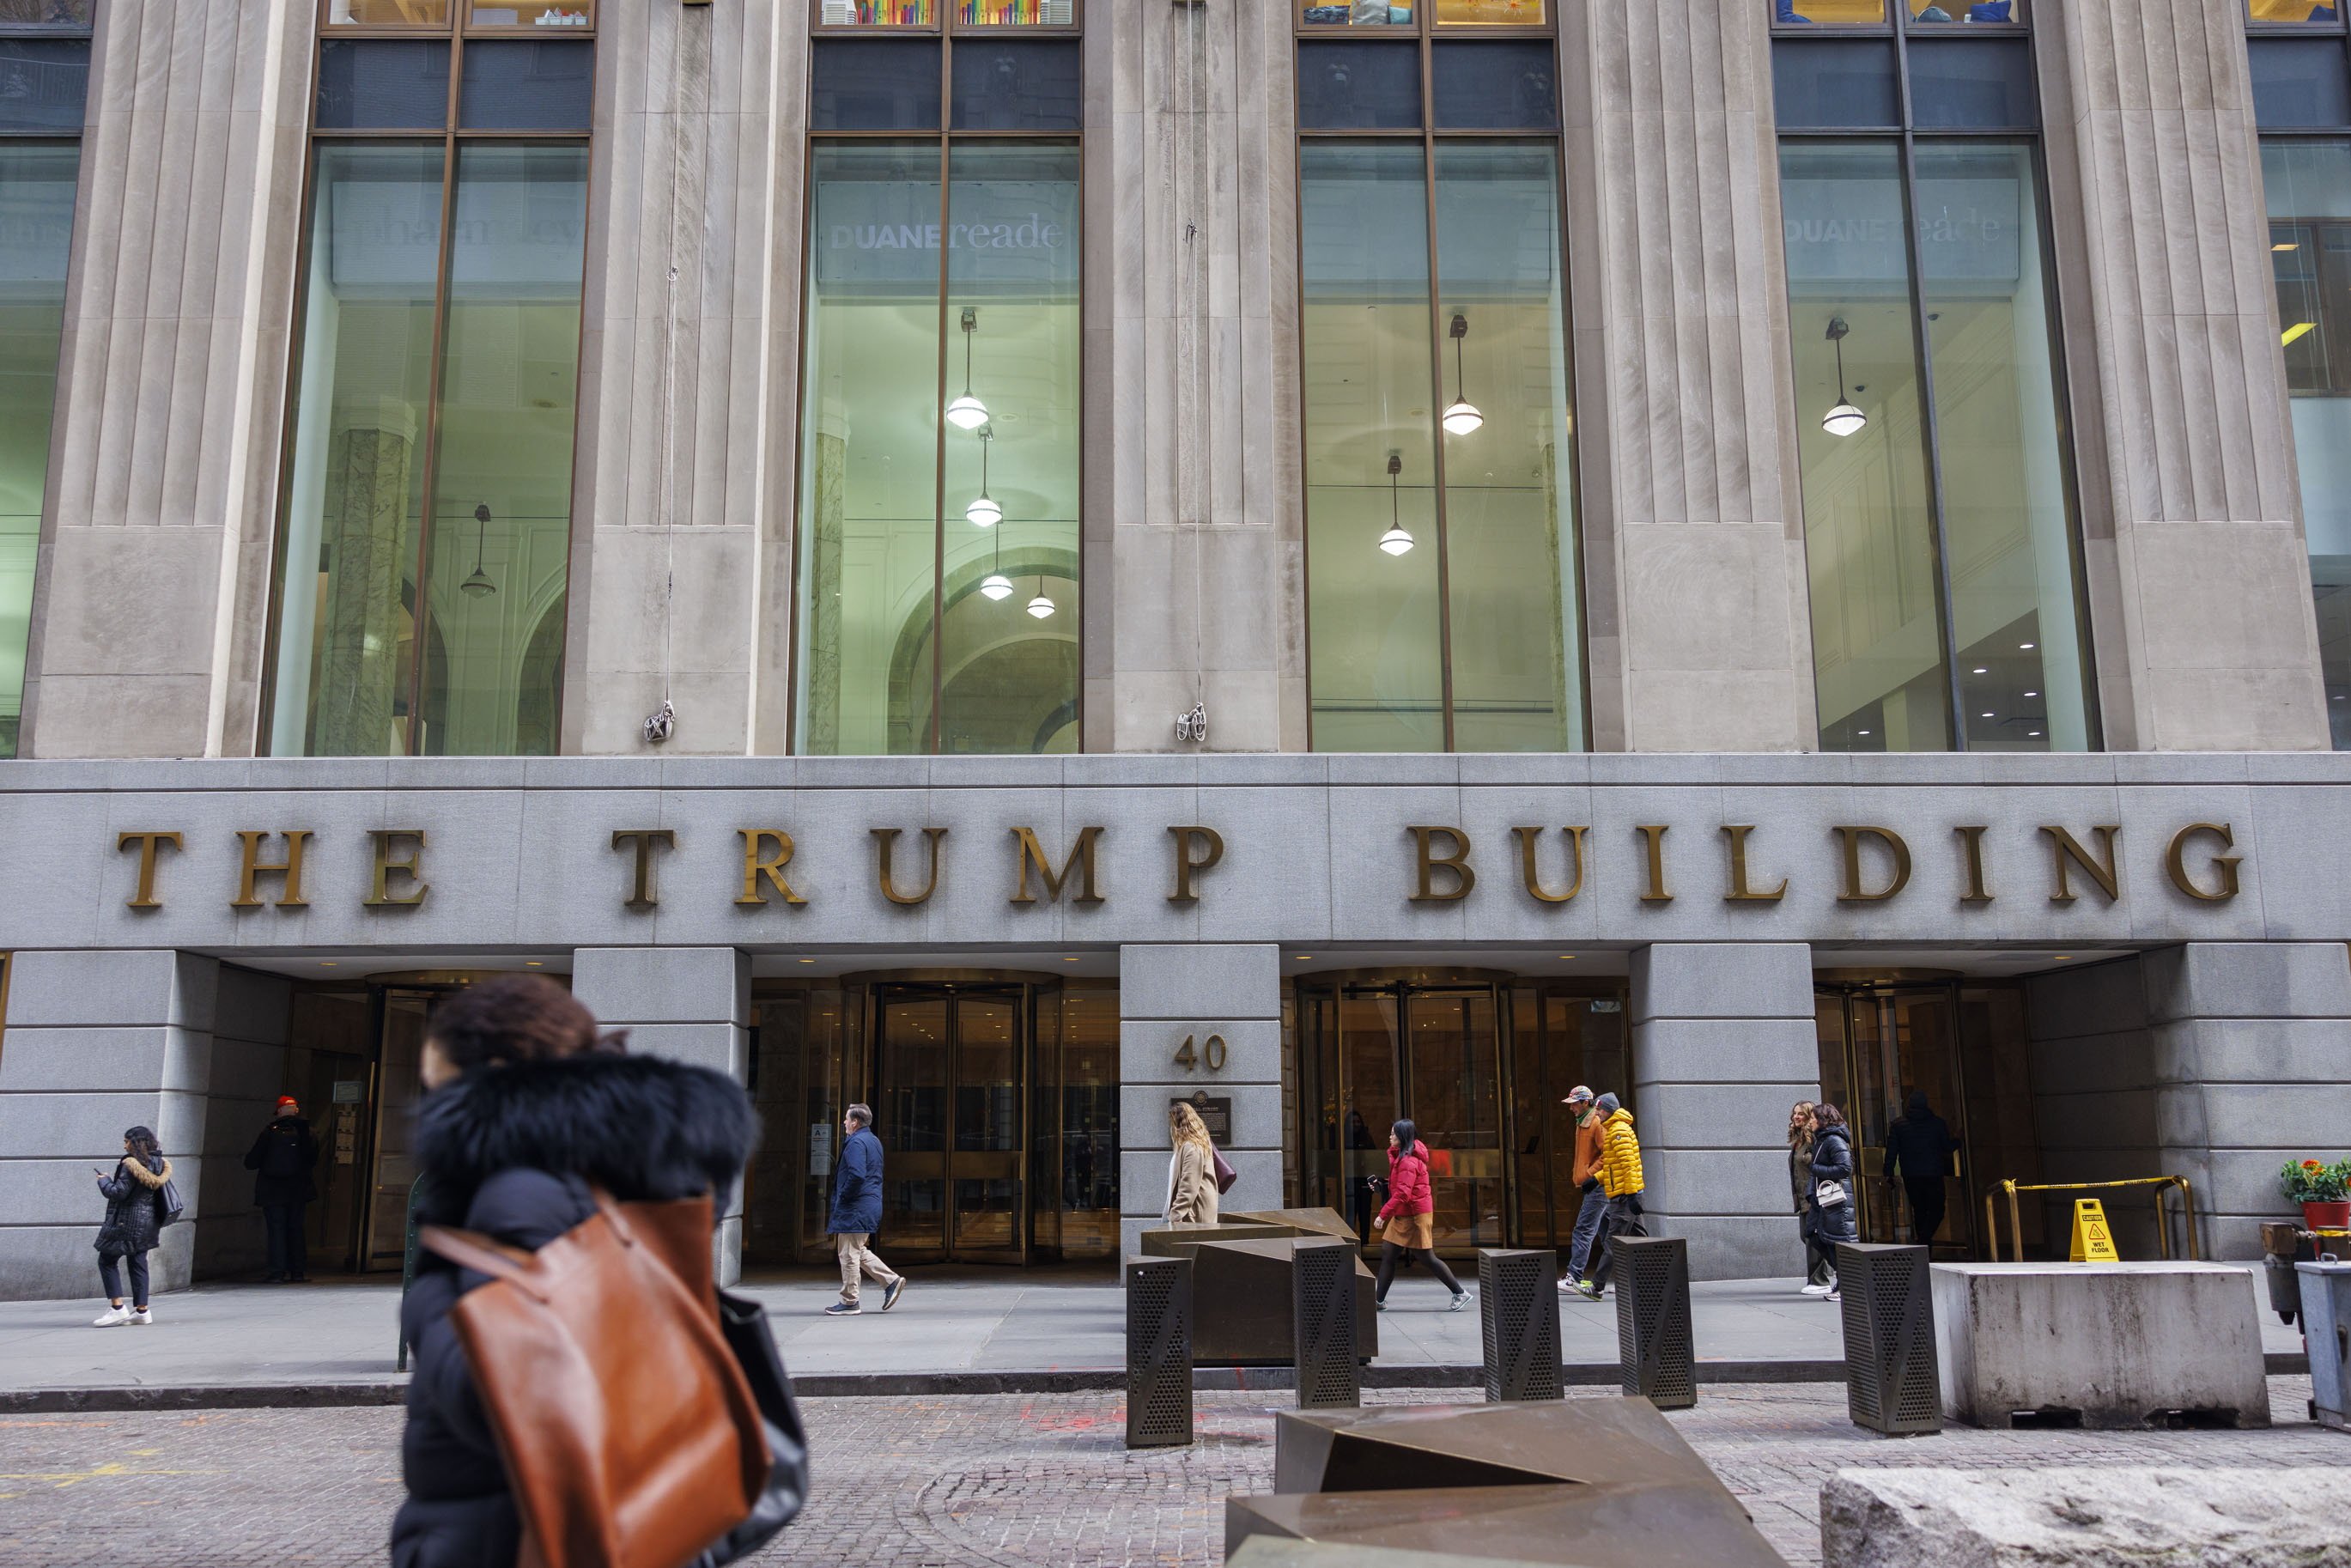 People walk in front of the Trump Building on 40 Wall Street in New York. Photo: EPA-EFE